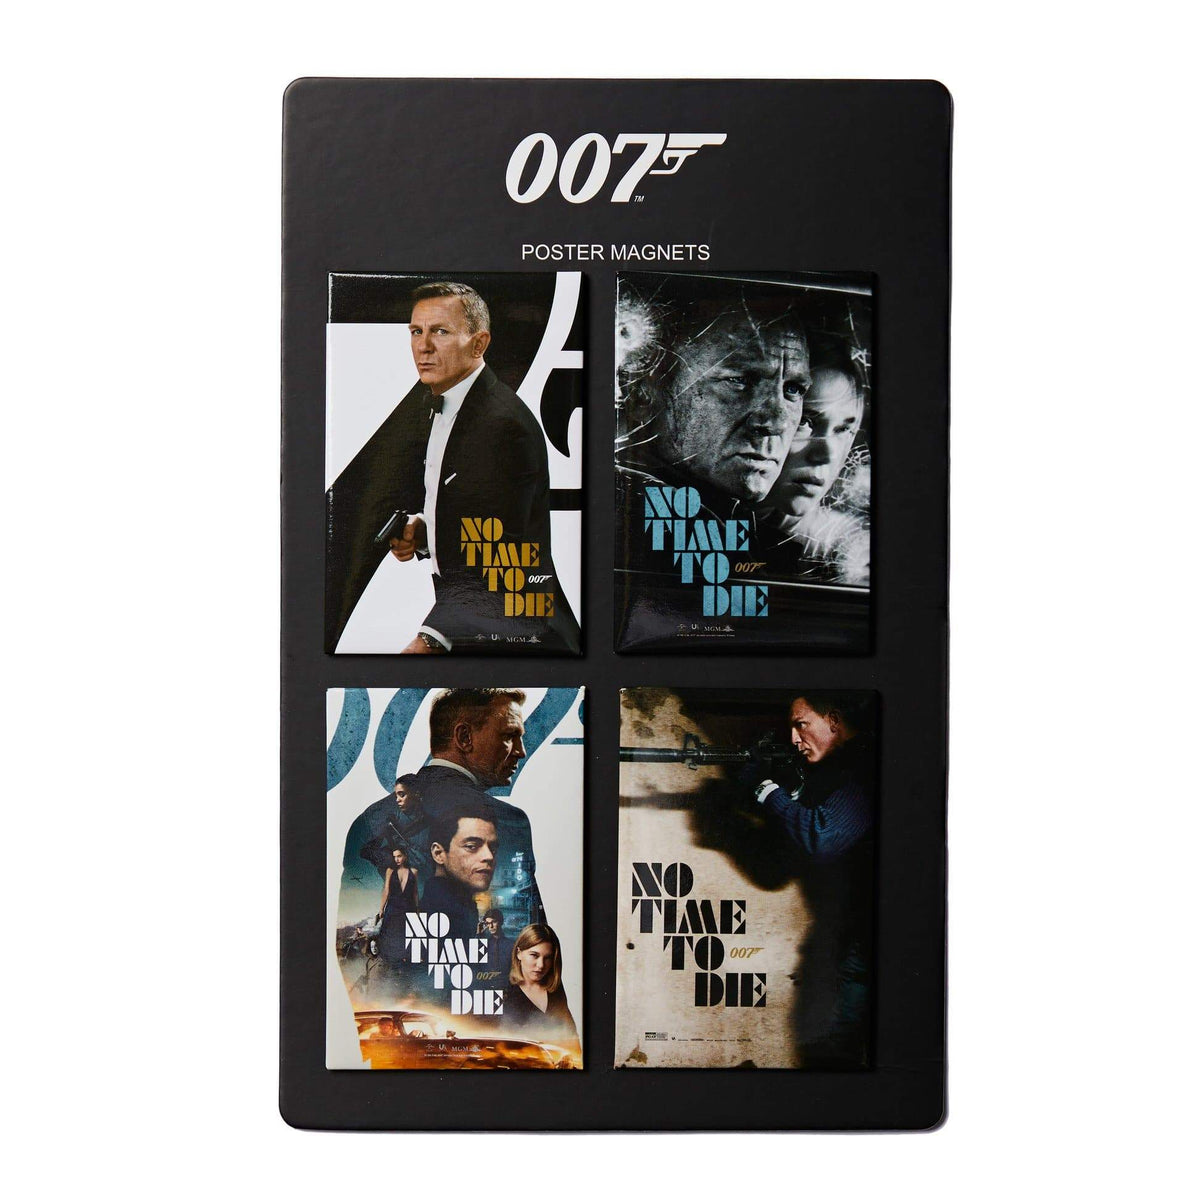 James Bond No Time To Die Poster Magnet Set 007Store